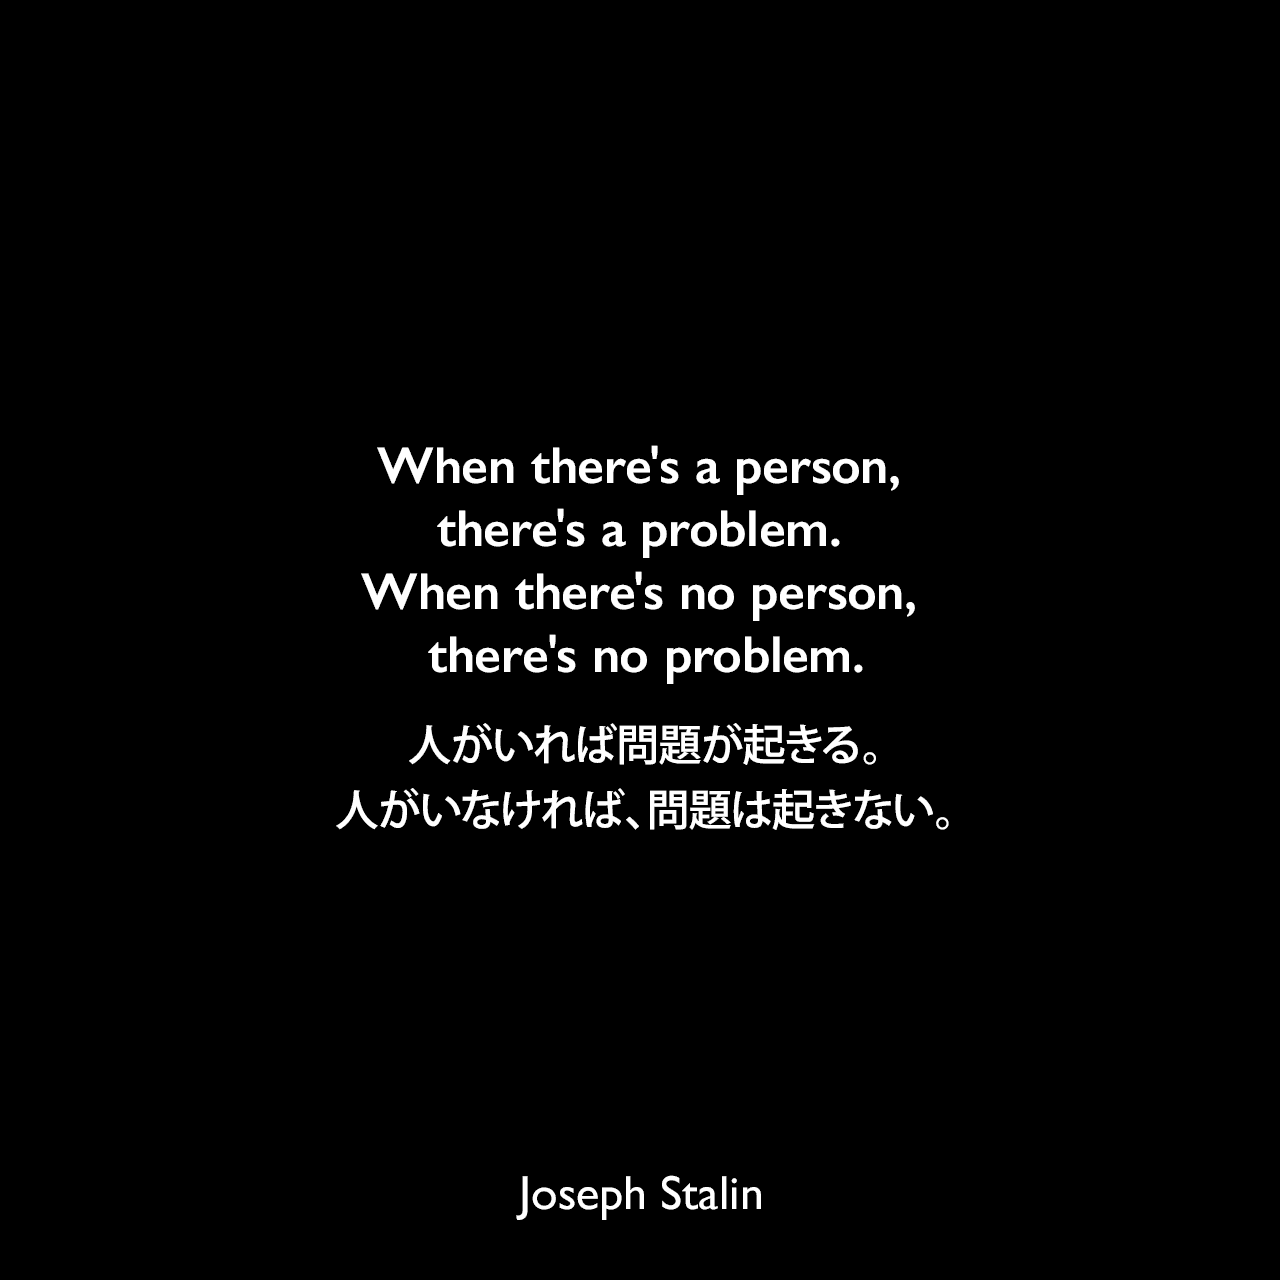 When there's a person, there's a problem. When there's no person, there's no problem.人がいれば問題が起きる。人がいなければ、問題は起きない。Joseph Stalin